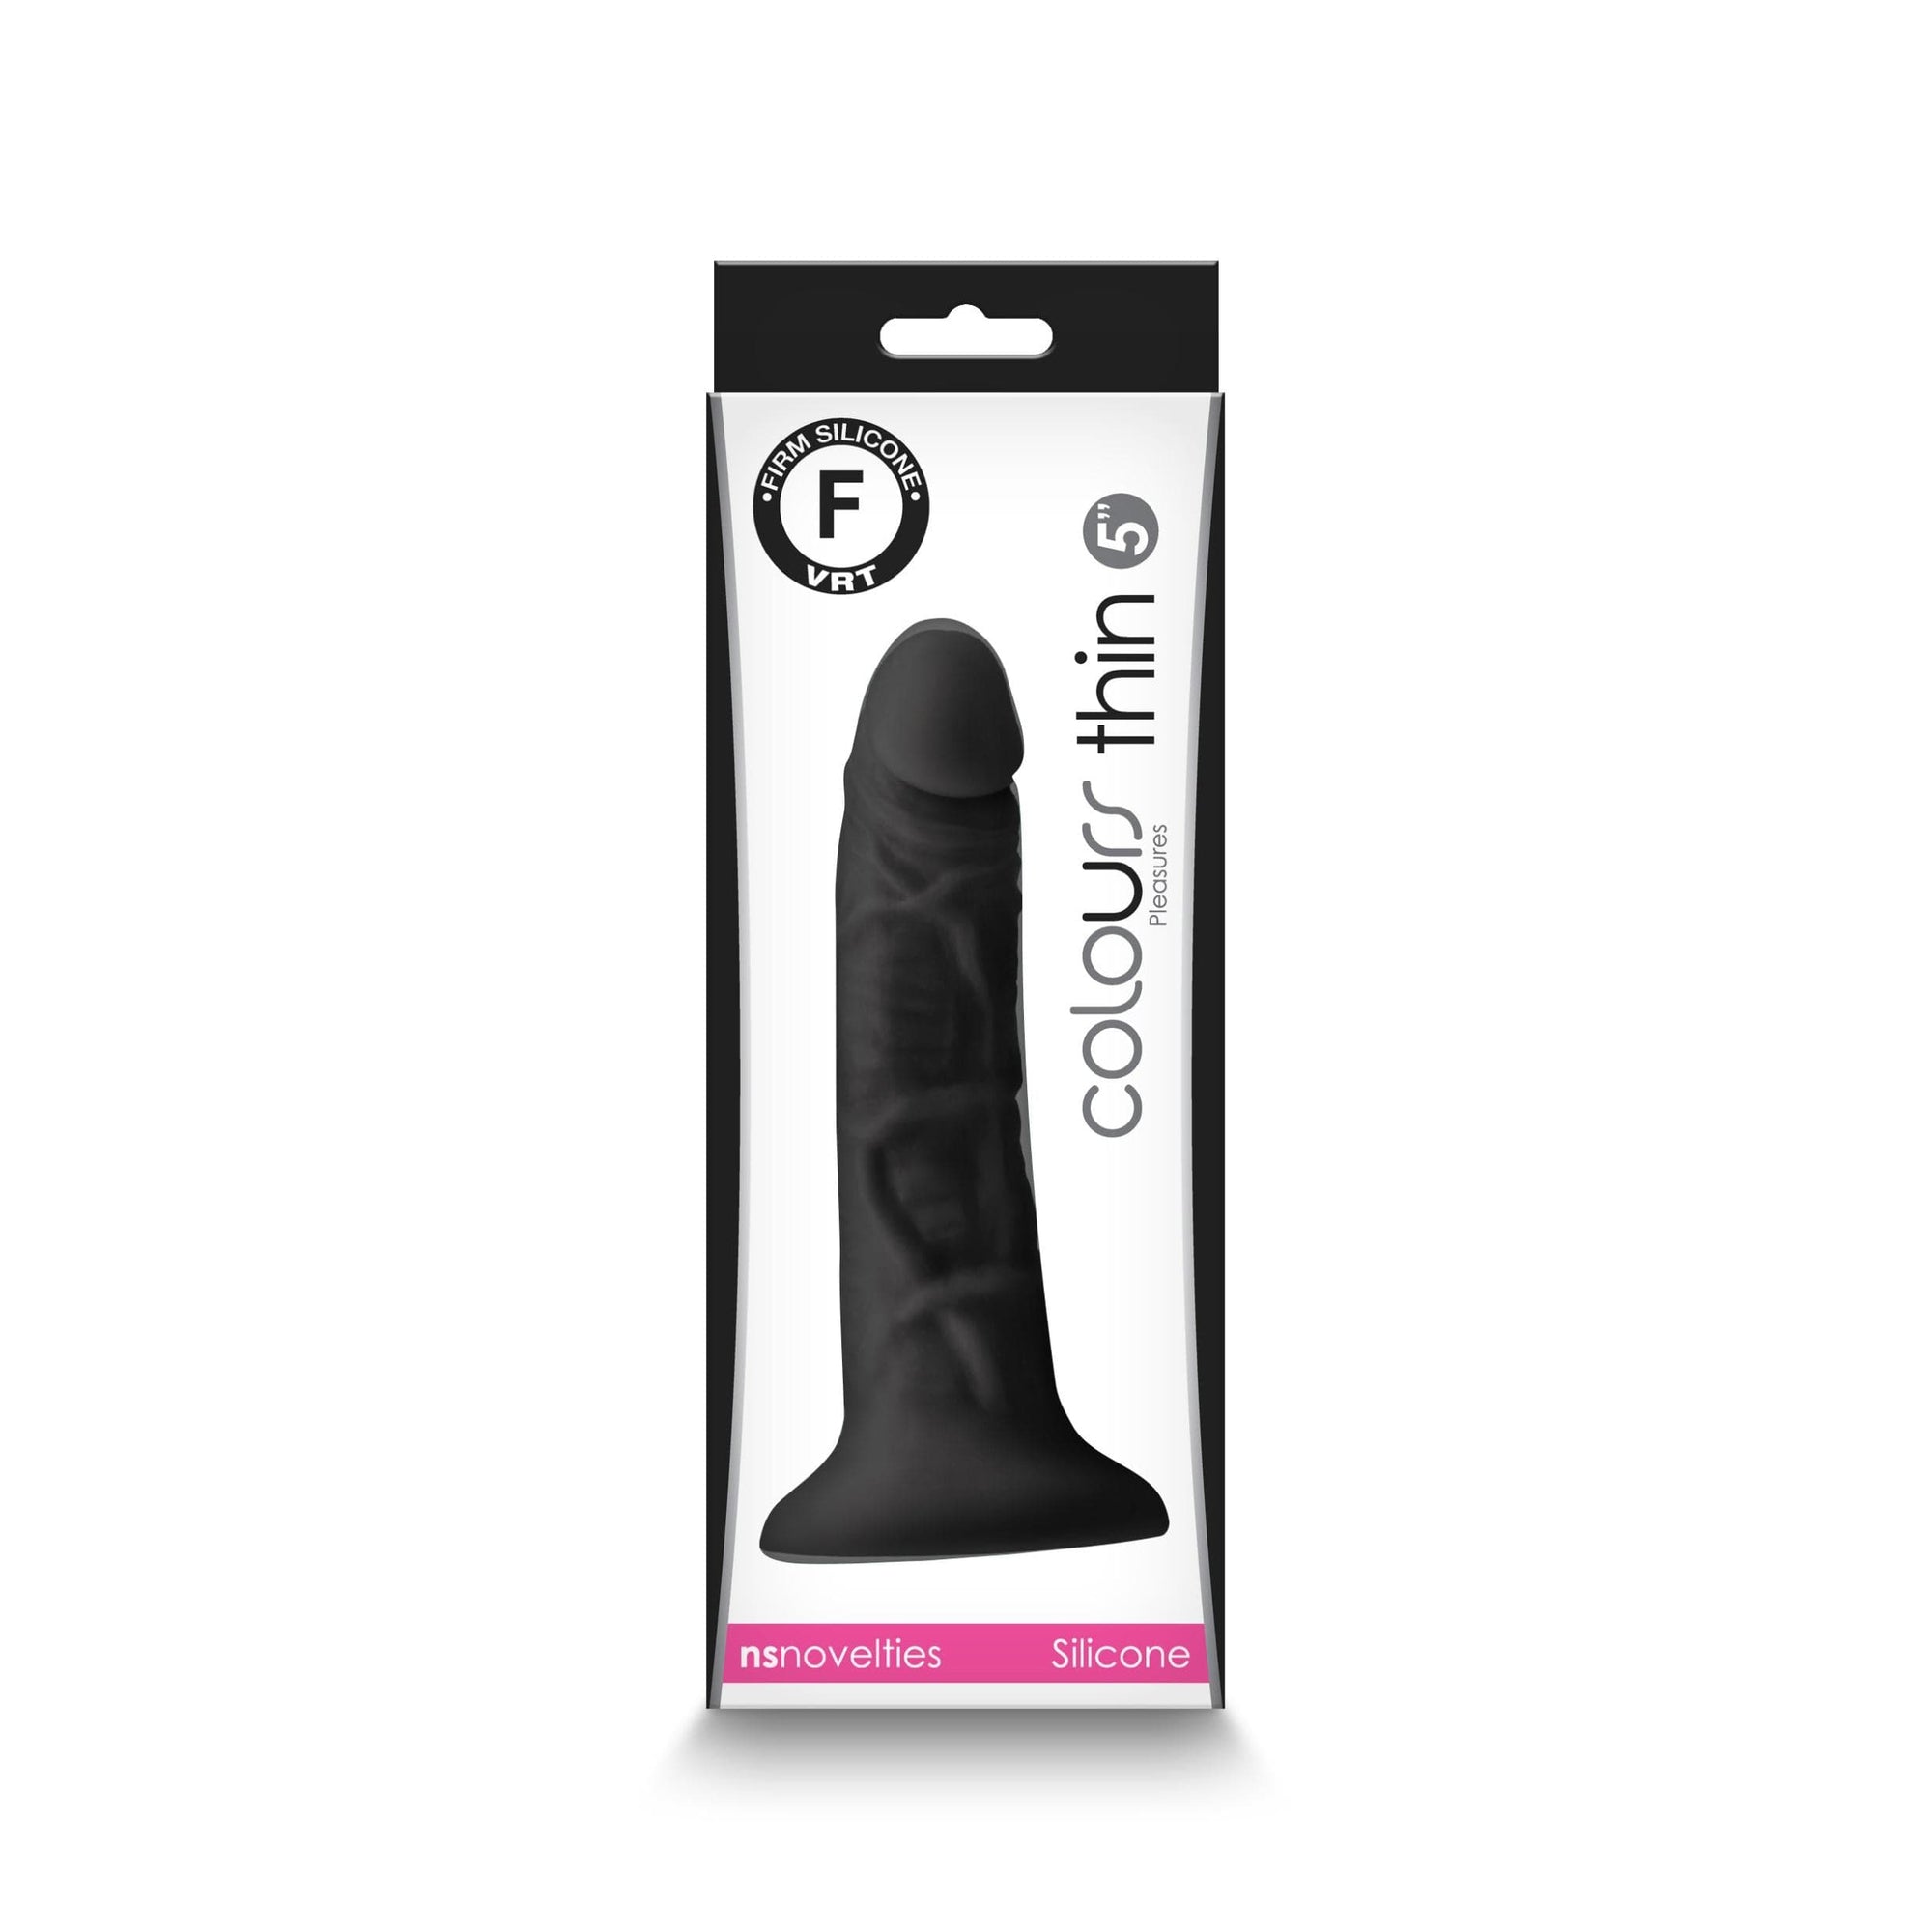 how to use suction cup dildo, vibrating suction dildo